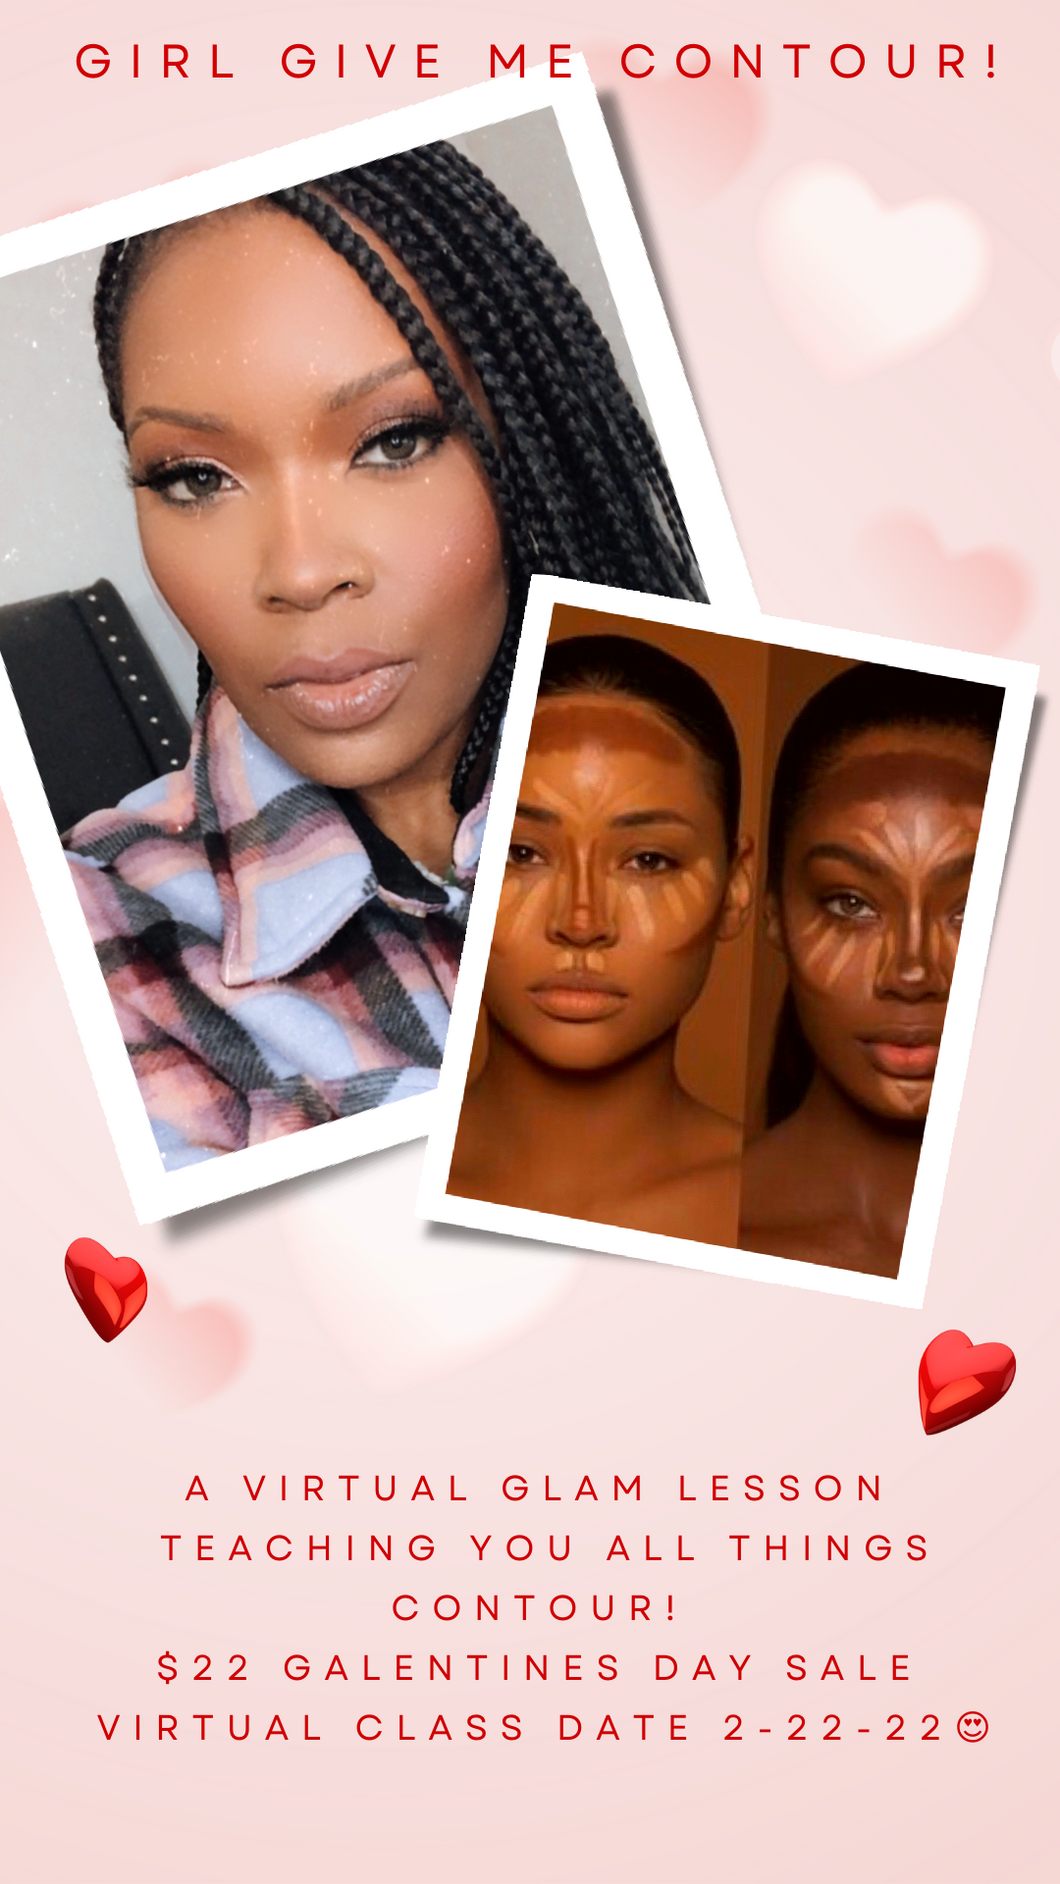 Girl Give Me Contour! Virtual Glam Lesson hosted by Brittni Fontleroy